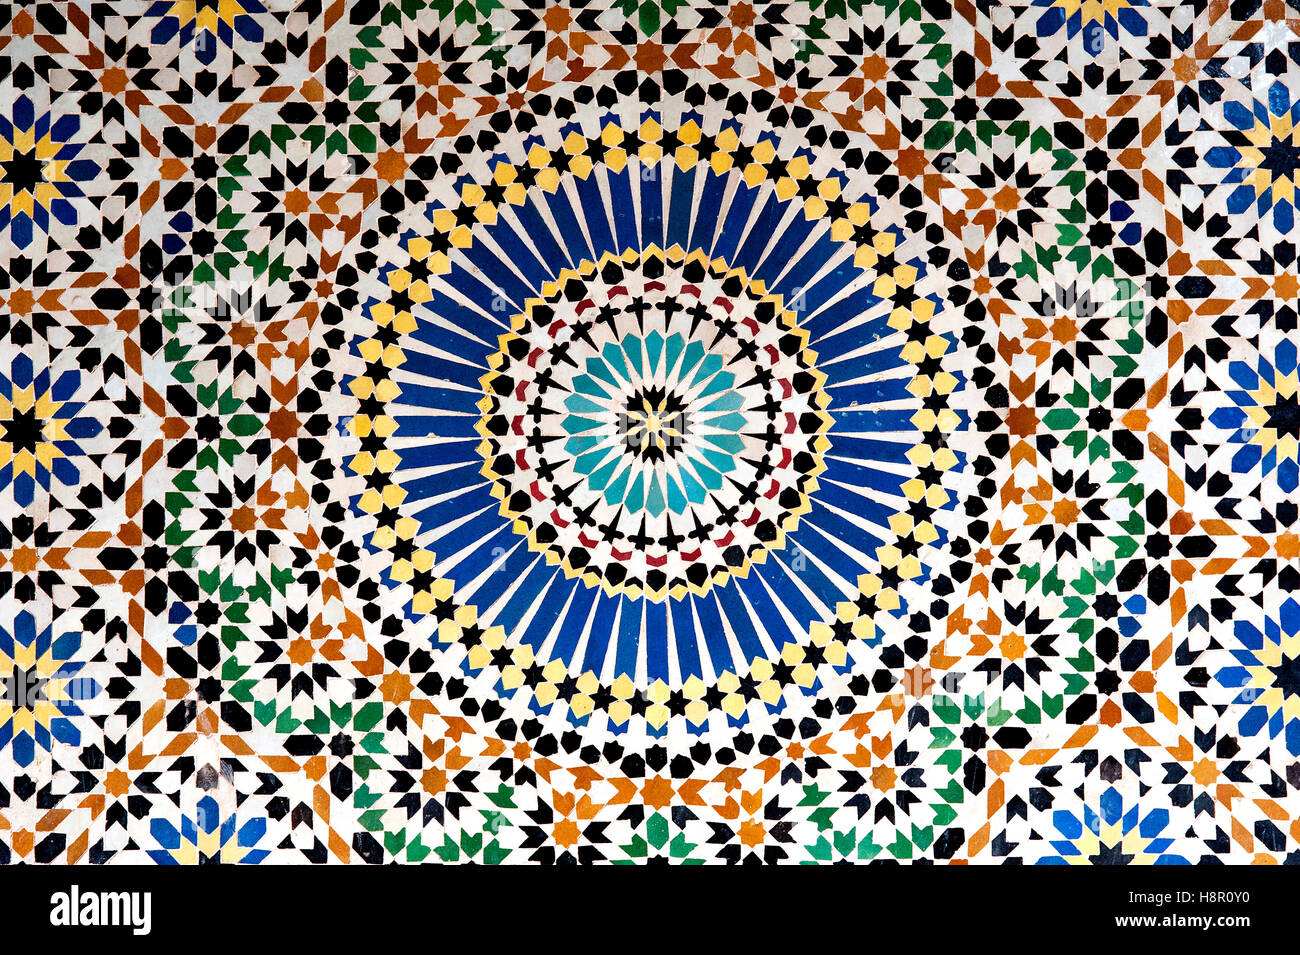 Mosaic, Kasbah Telouet, Morocco: the colorful geometric patterns of an Islamic mosaic decorate the walls the Kasbah Telouet. Stock Photo